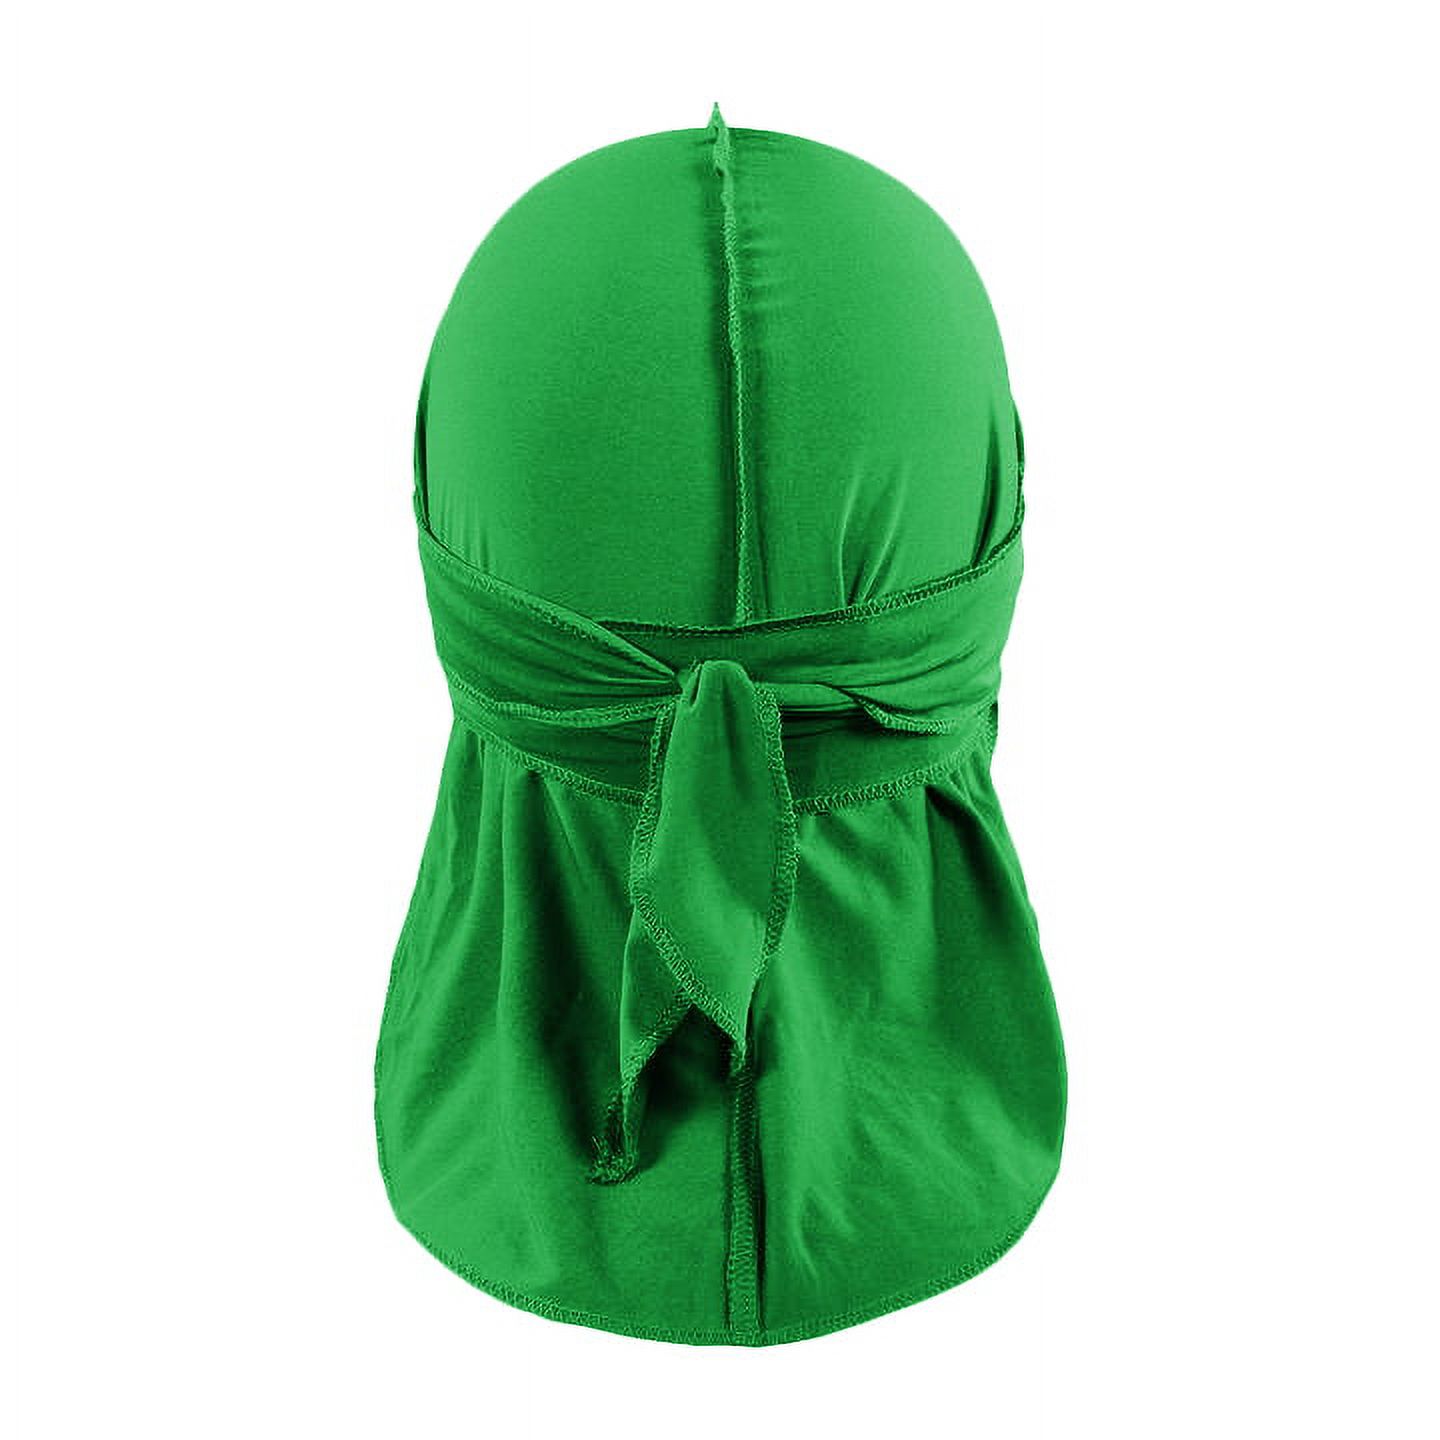 Pack of 3 Durags Headwrap for Men Waves Headscarf Bandana Doo Rag Tail (Green) - image 2 of 4